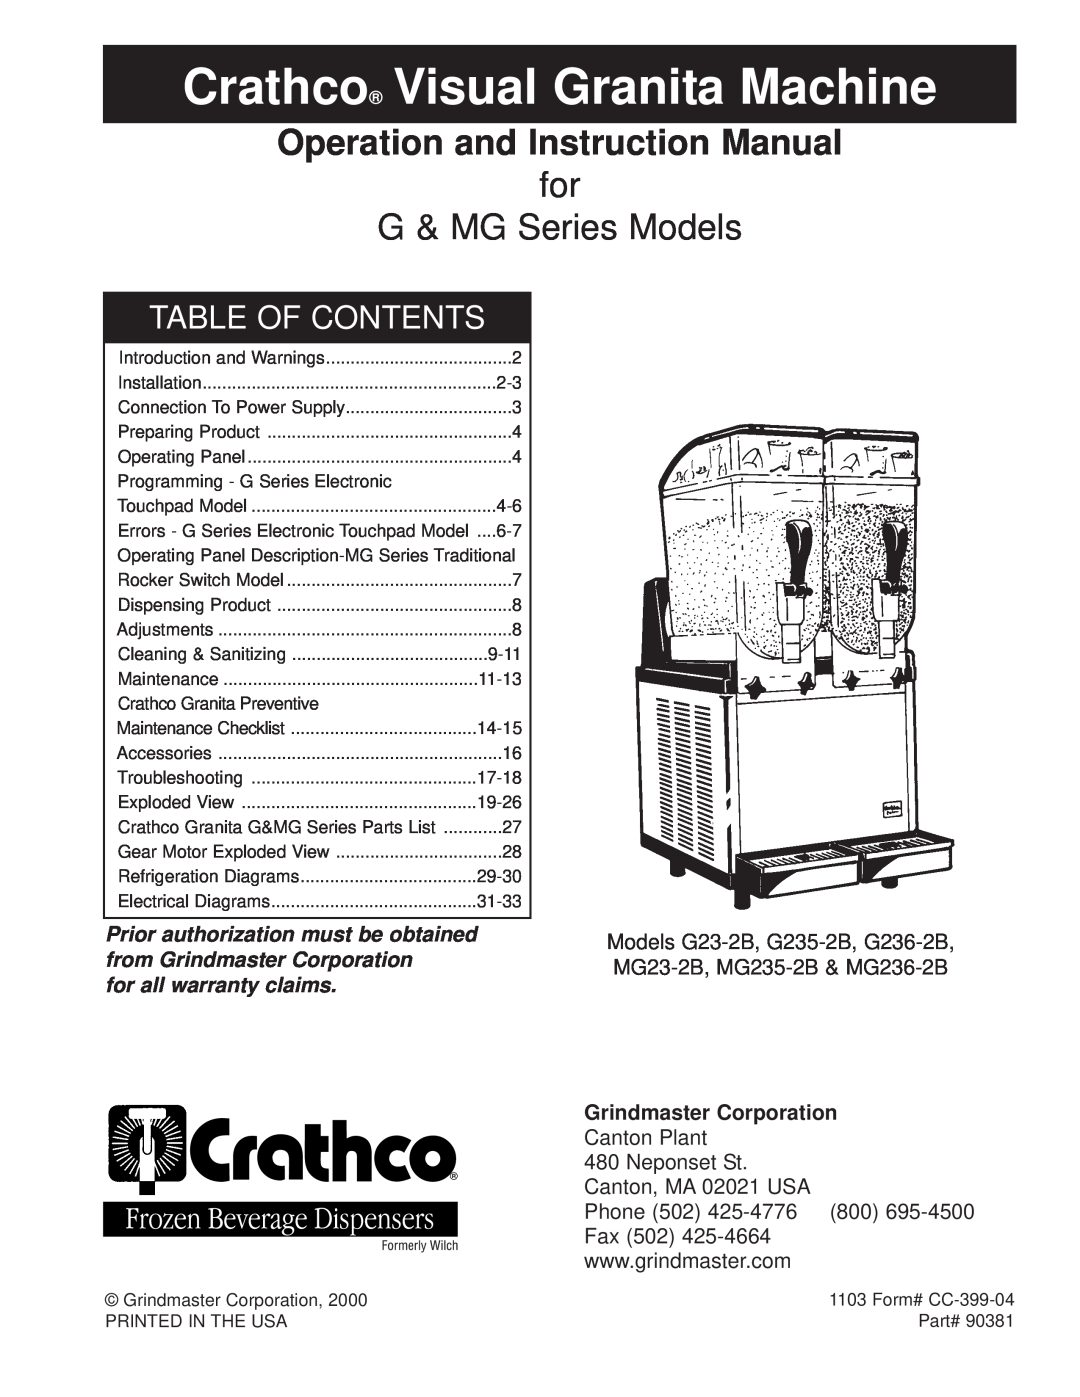 Grindmaster G & MG Series instruction manual Prior authorization must be obtained from Grindmaster Corporation 